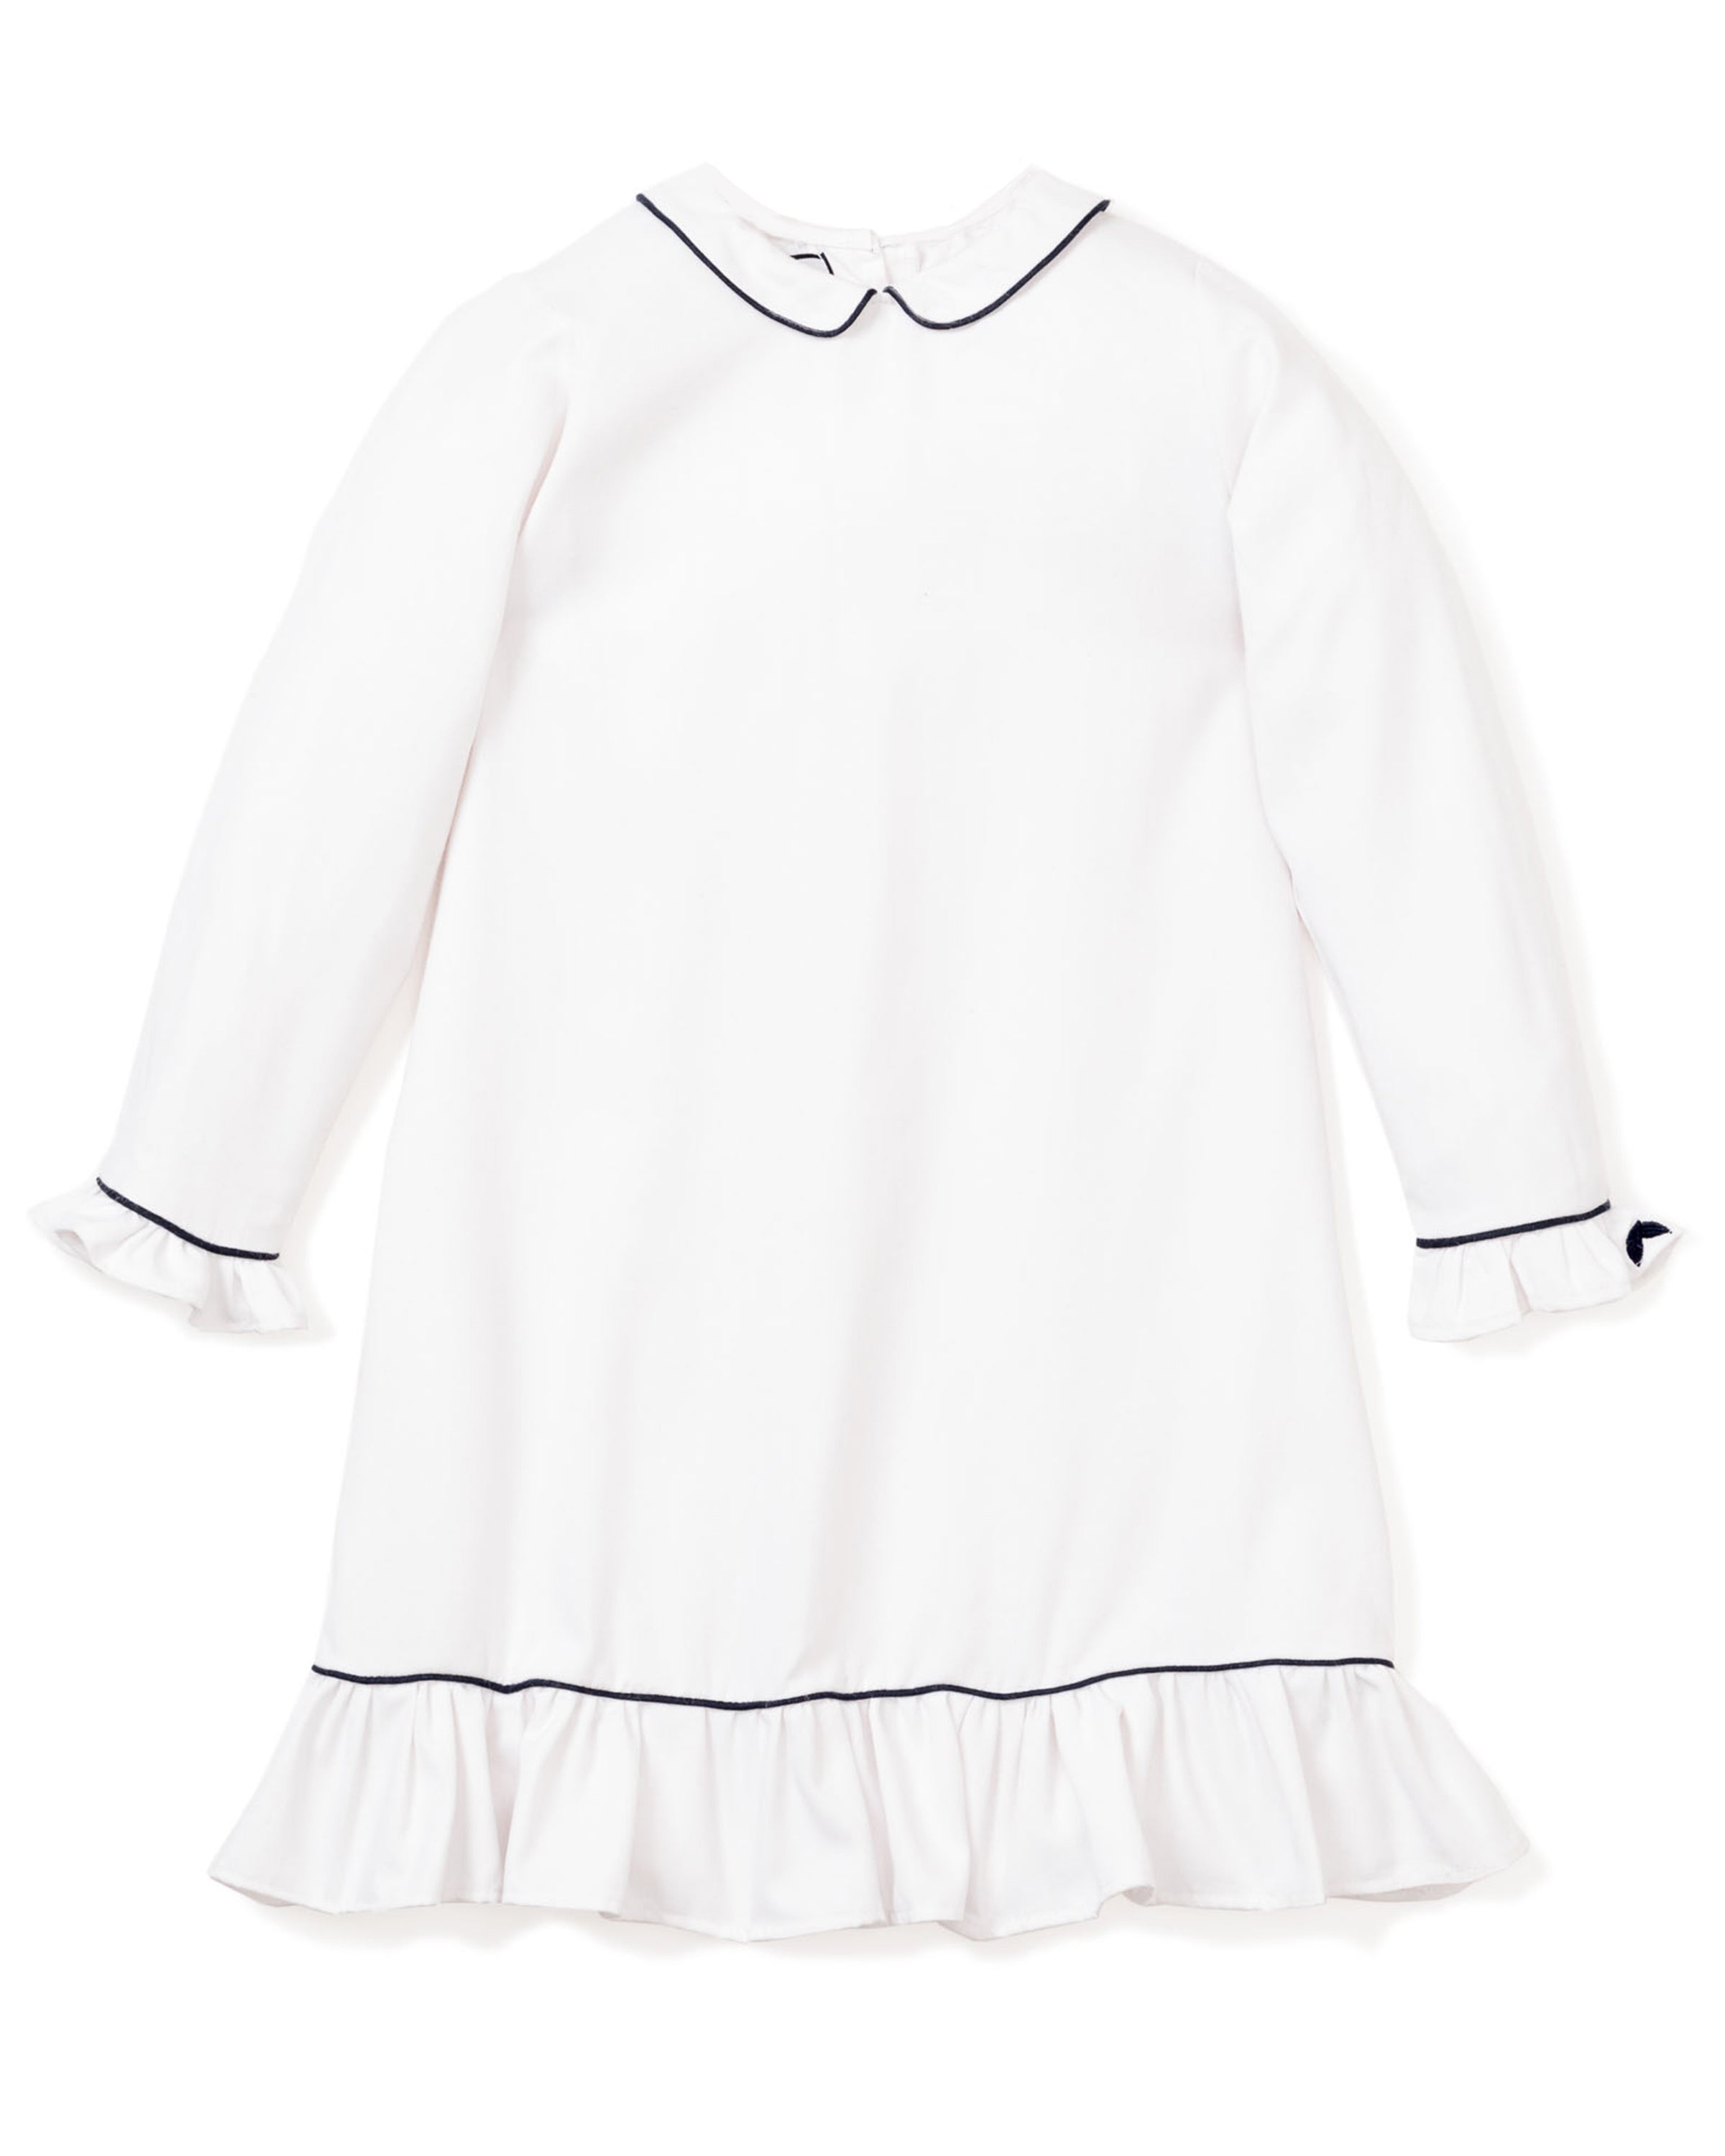 Girl's Twill Sophia Nightgown in White with Navy Piping